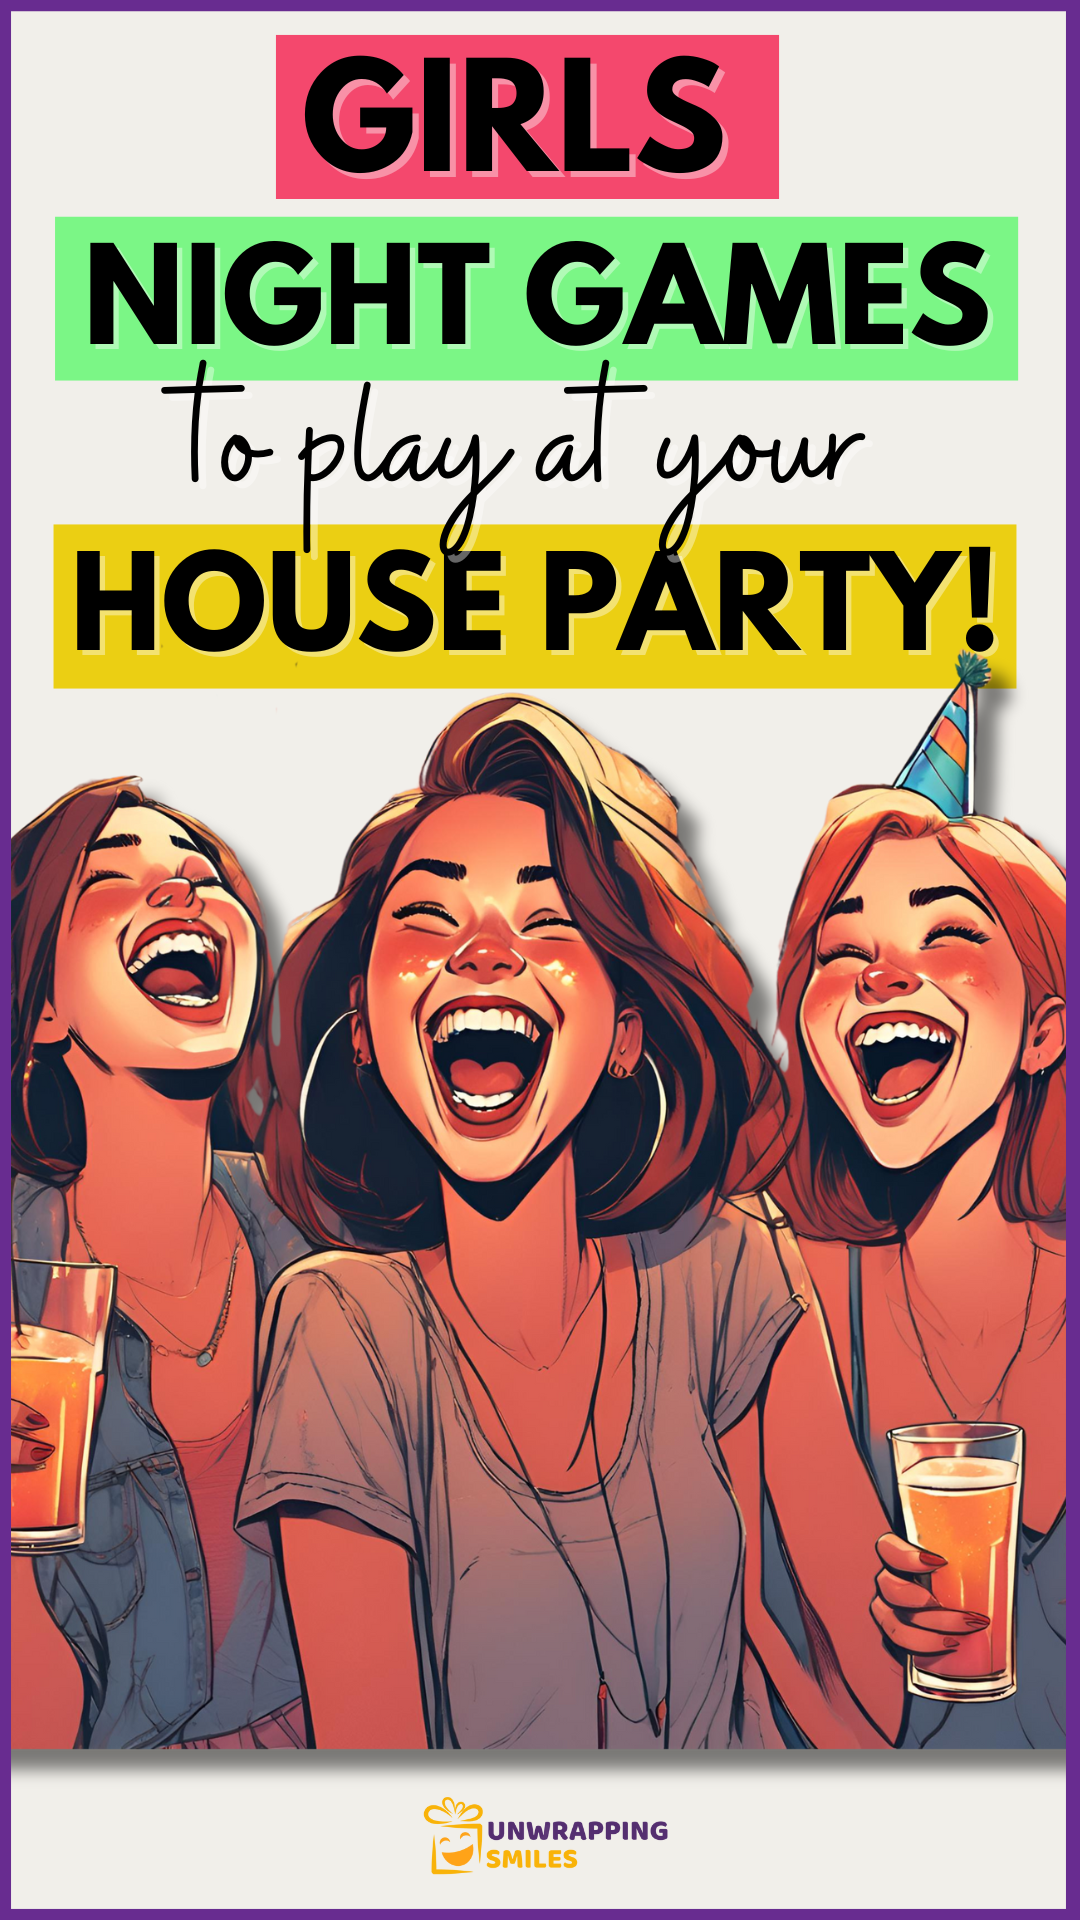 Girls Night Games For a House Party